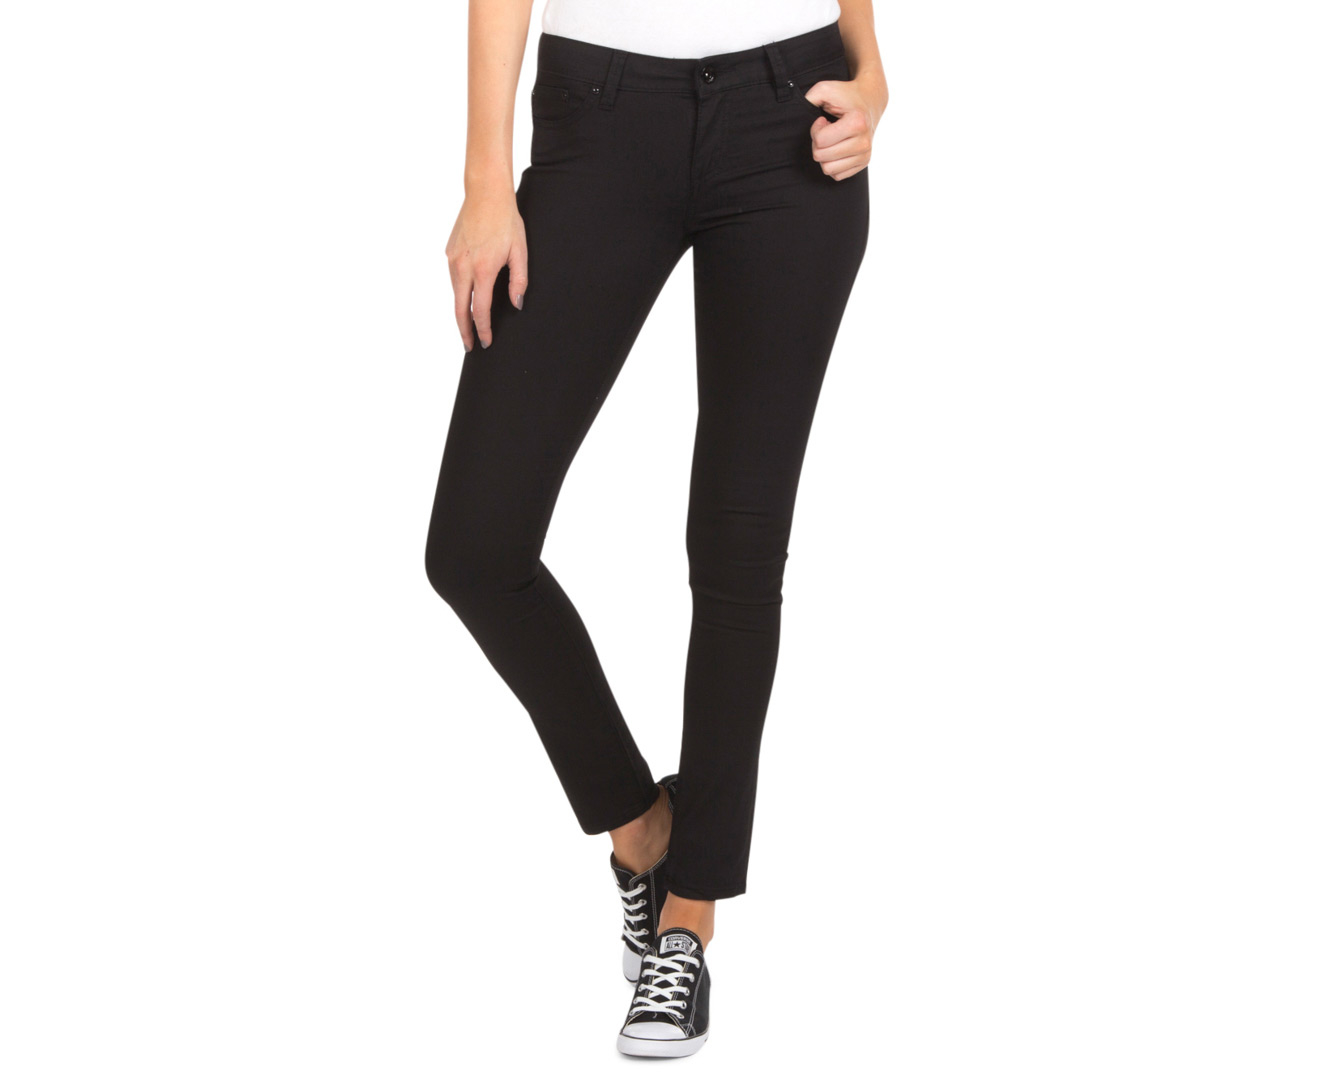 Riders by Lee Women's Bumster Super Skinny Jean - New Black